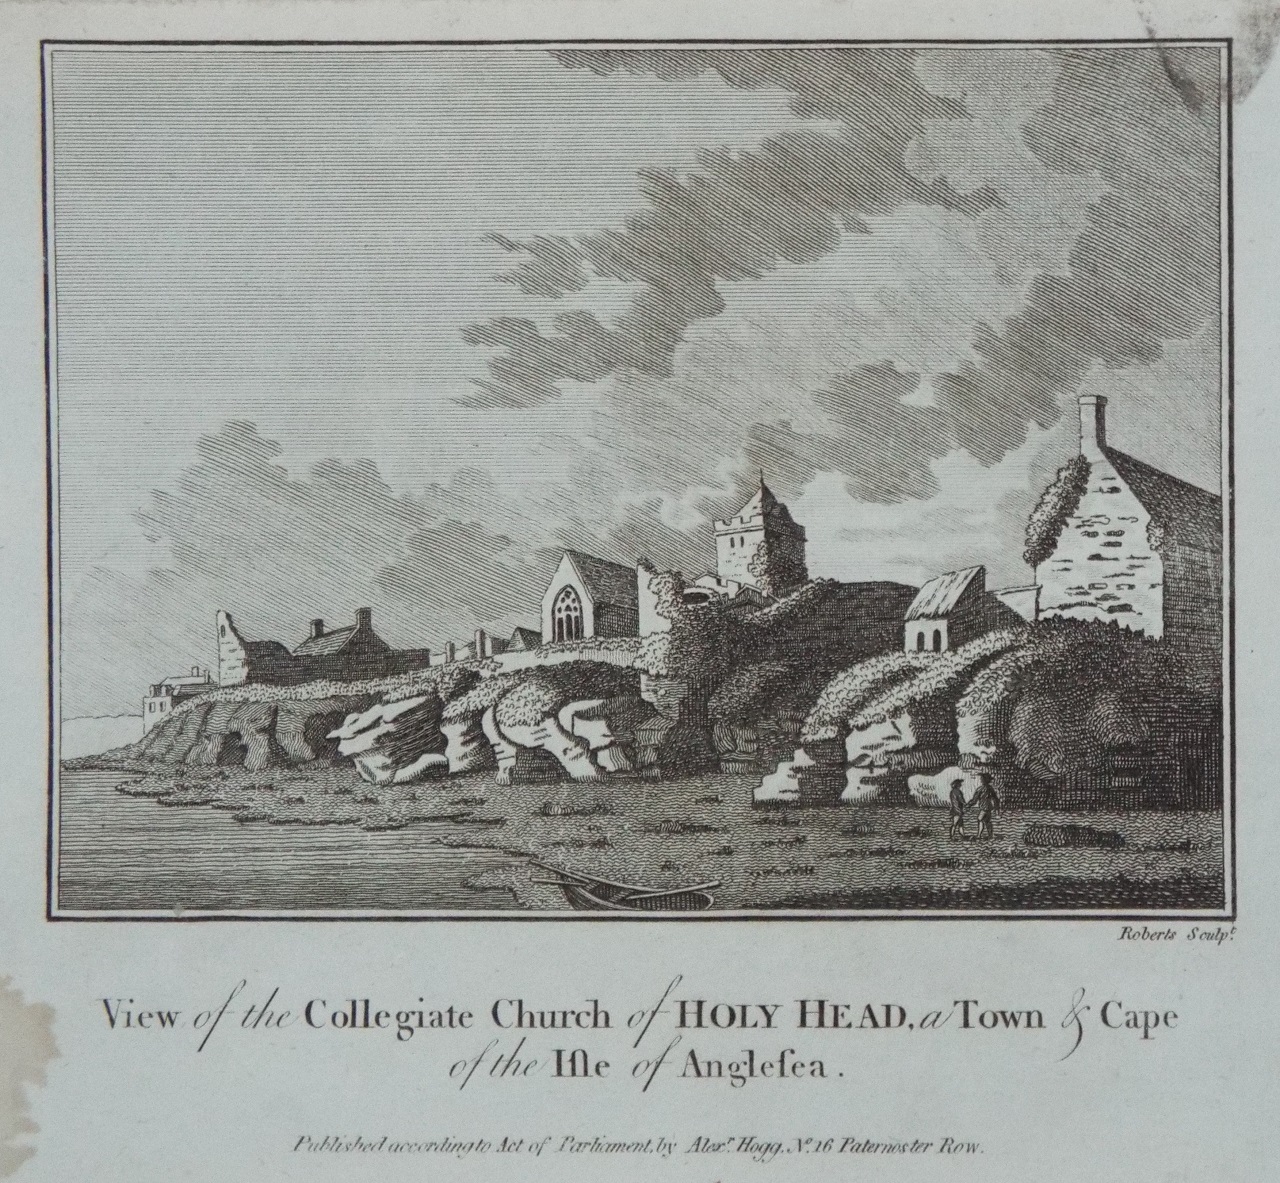 Print - View of the Collegiate Church of Holy Head, a Town & Cape of the Isle of Anglesea. - 